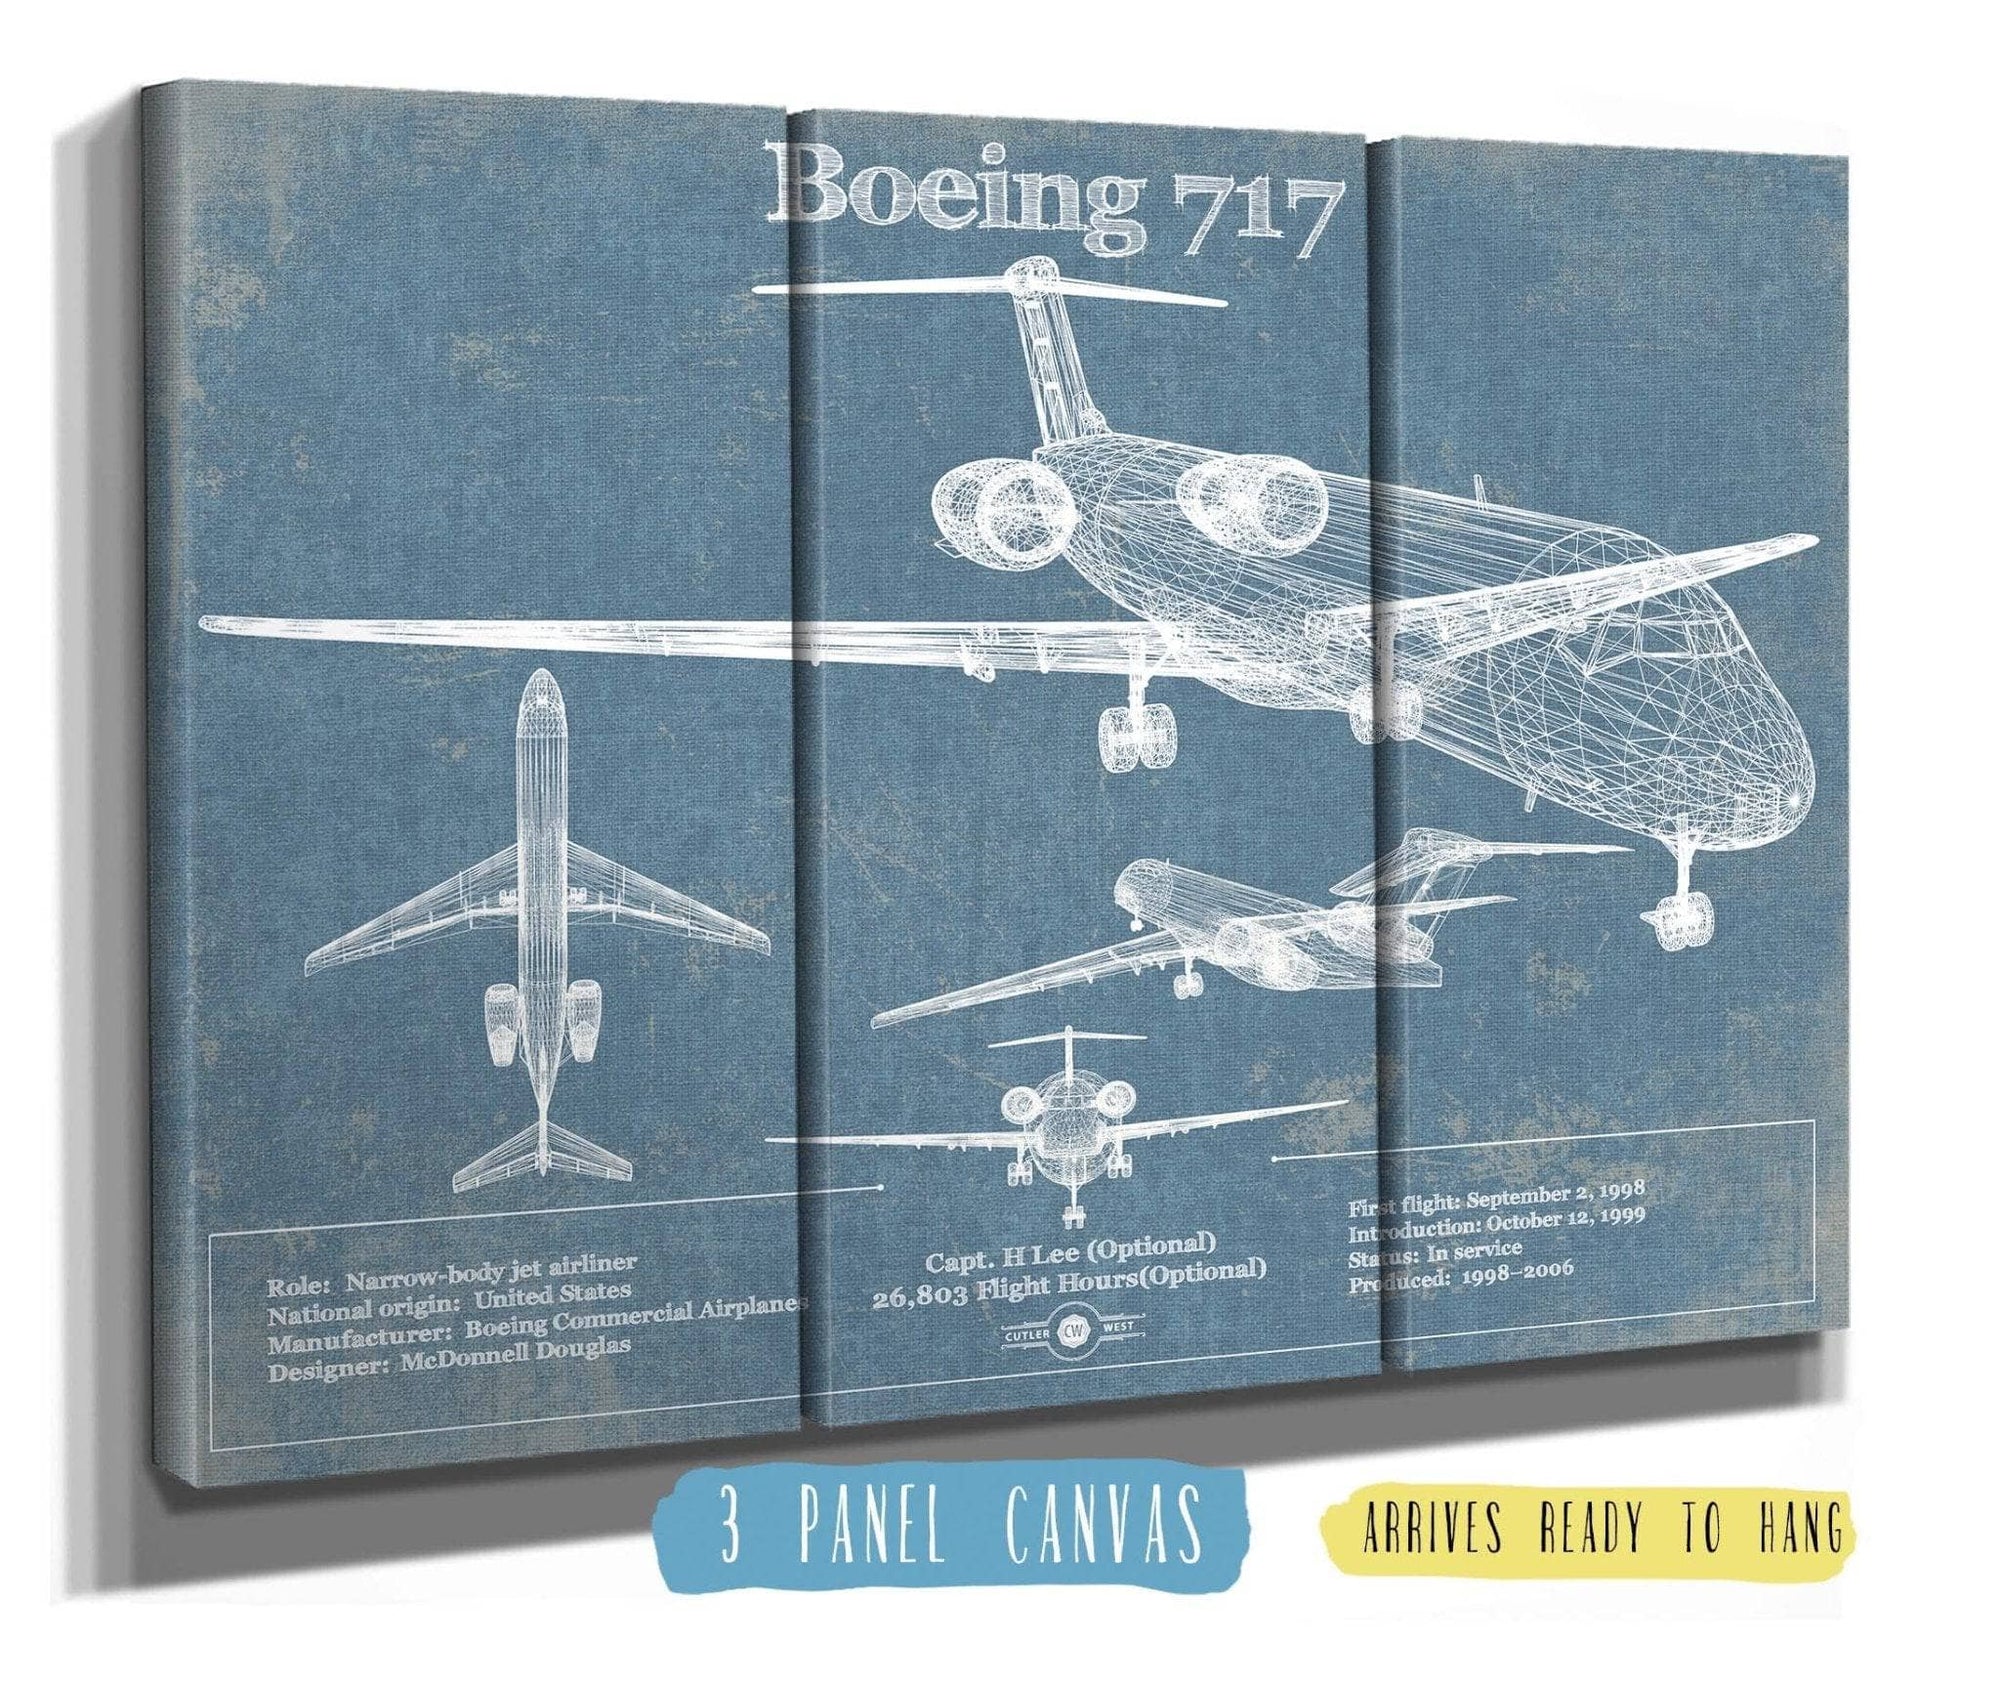 Cutler West Boeing Collection 48" x 32" / 3 Panel Canvas Wrap Boeing 717 Vintage Aviation Blueprint Print - Custom Pilot Name Can Be Added 840189113_48523